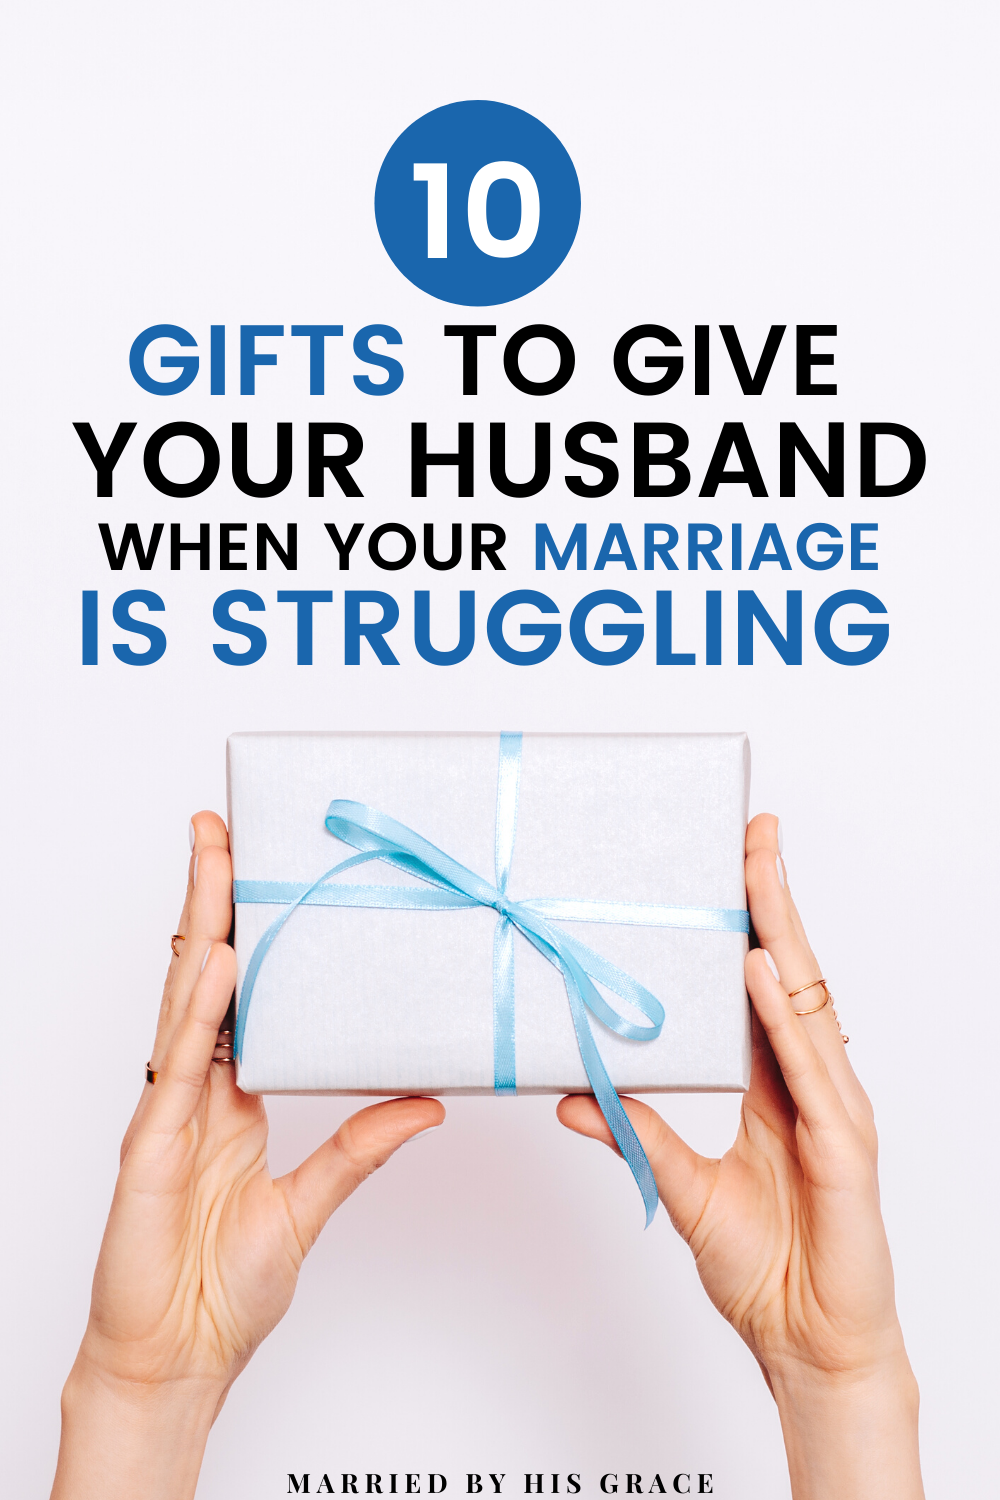 10 gifts for husband